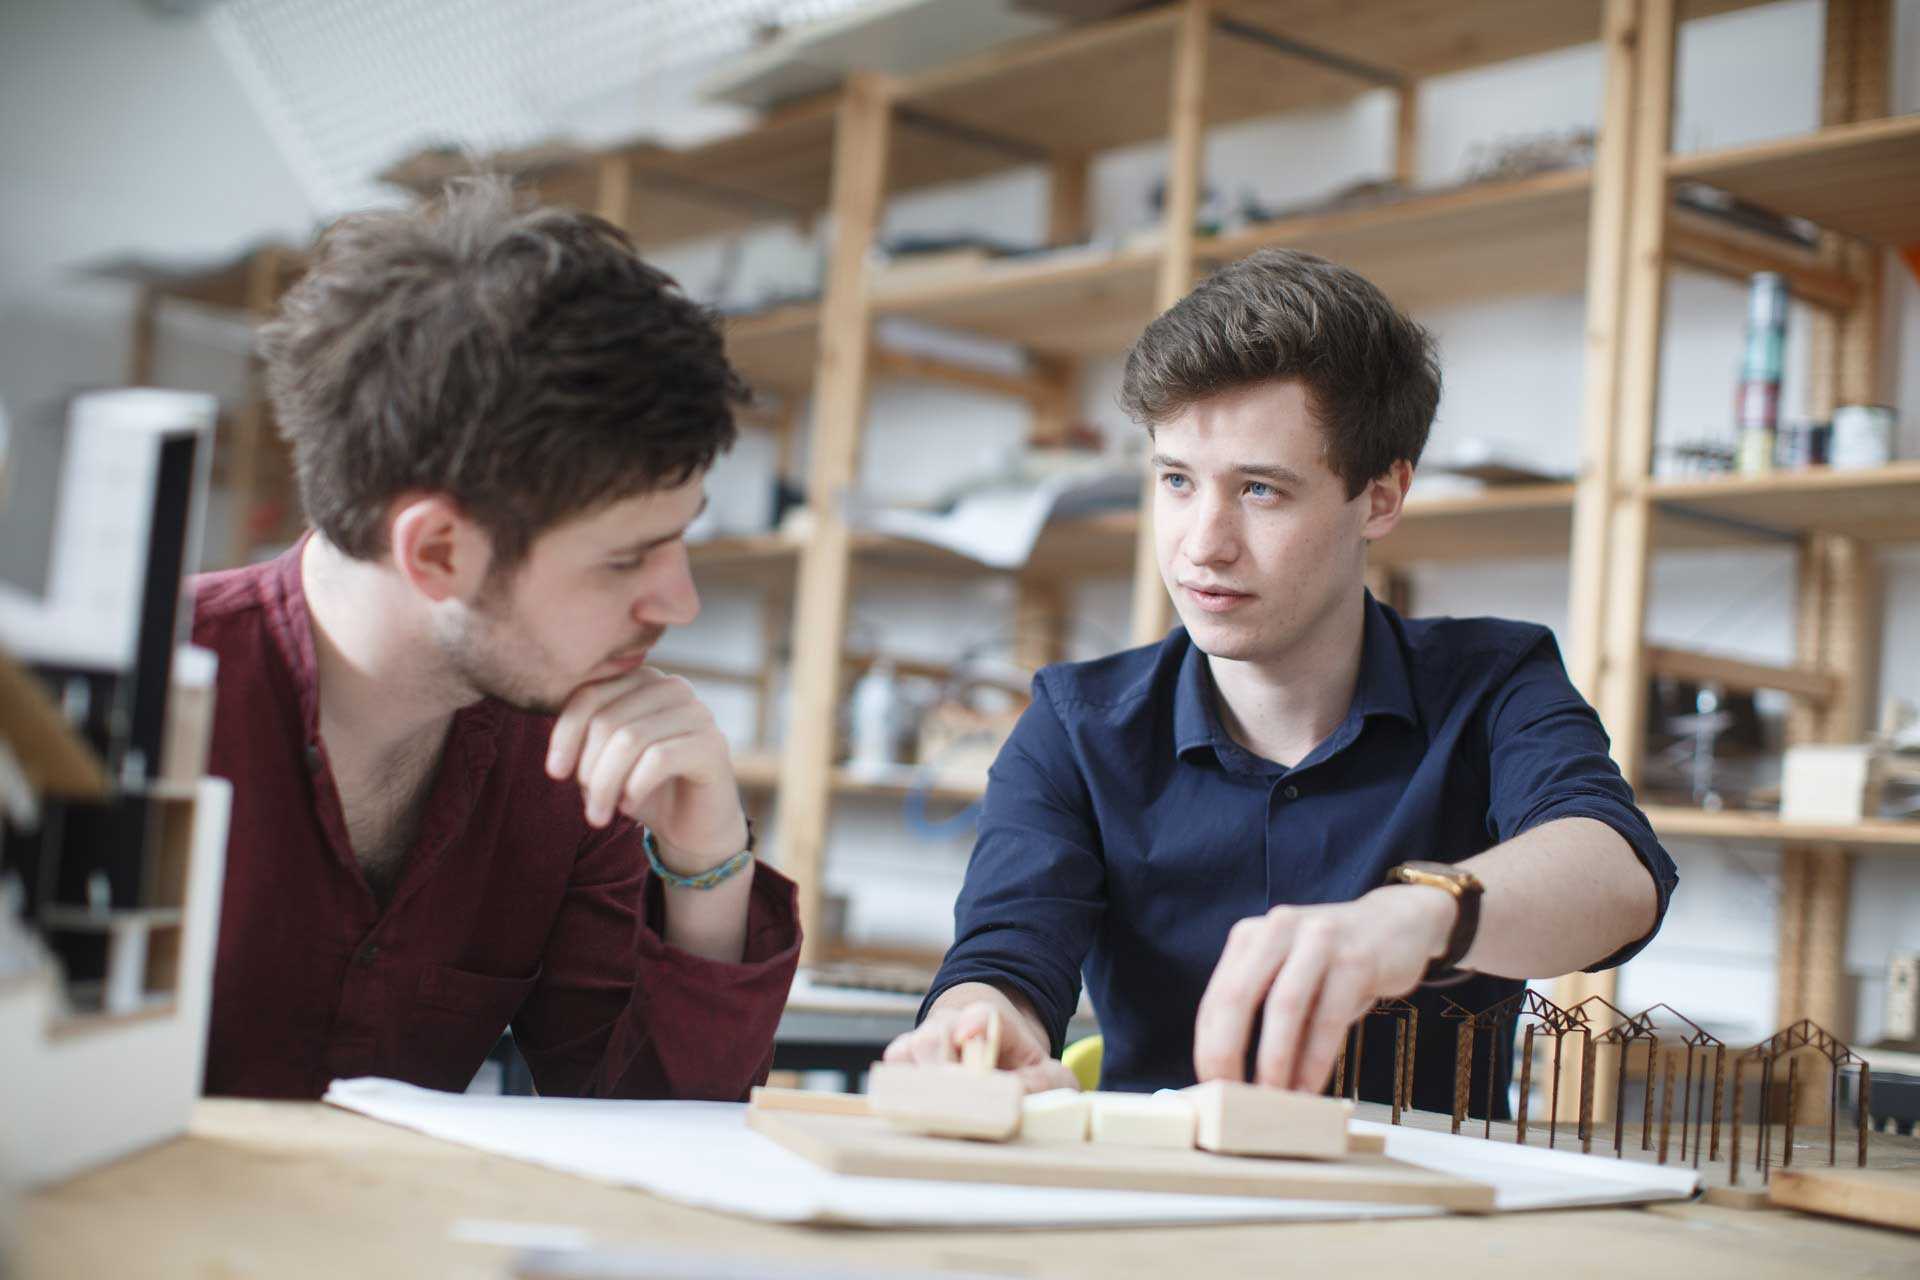 Edward Powe, architecture student, showing a friend a model that he is working on